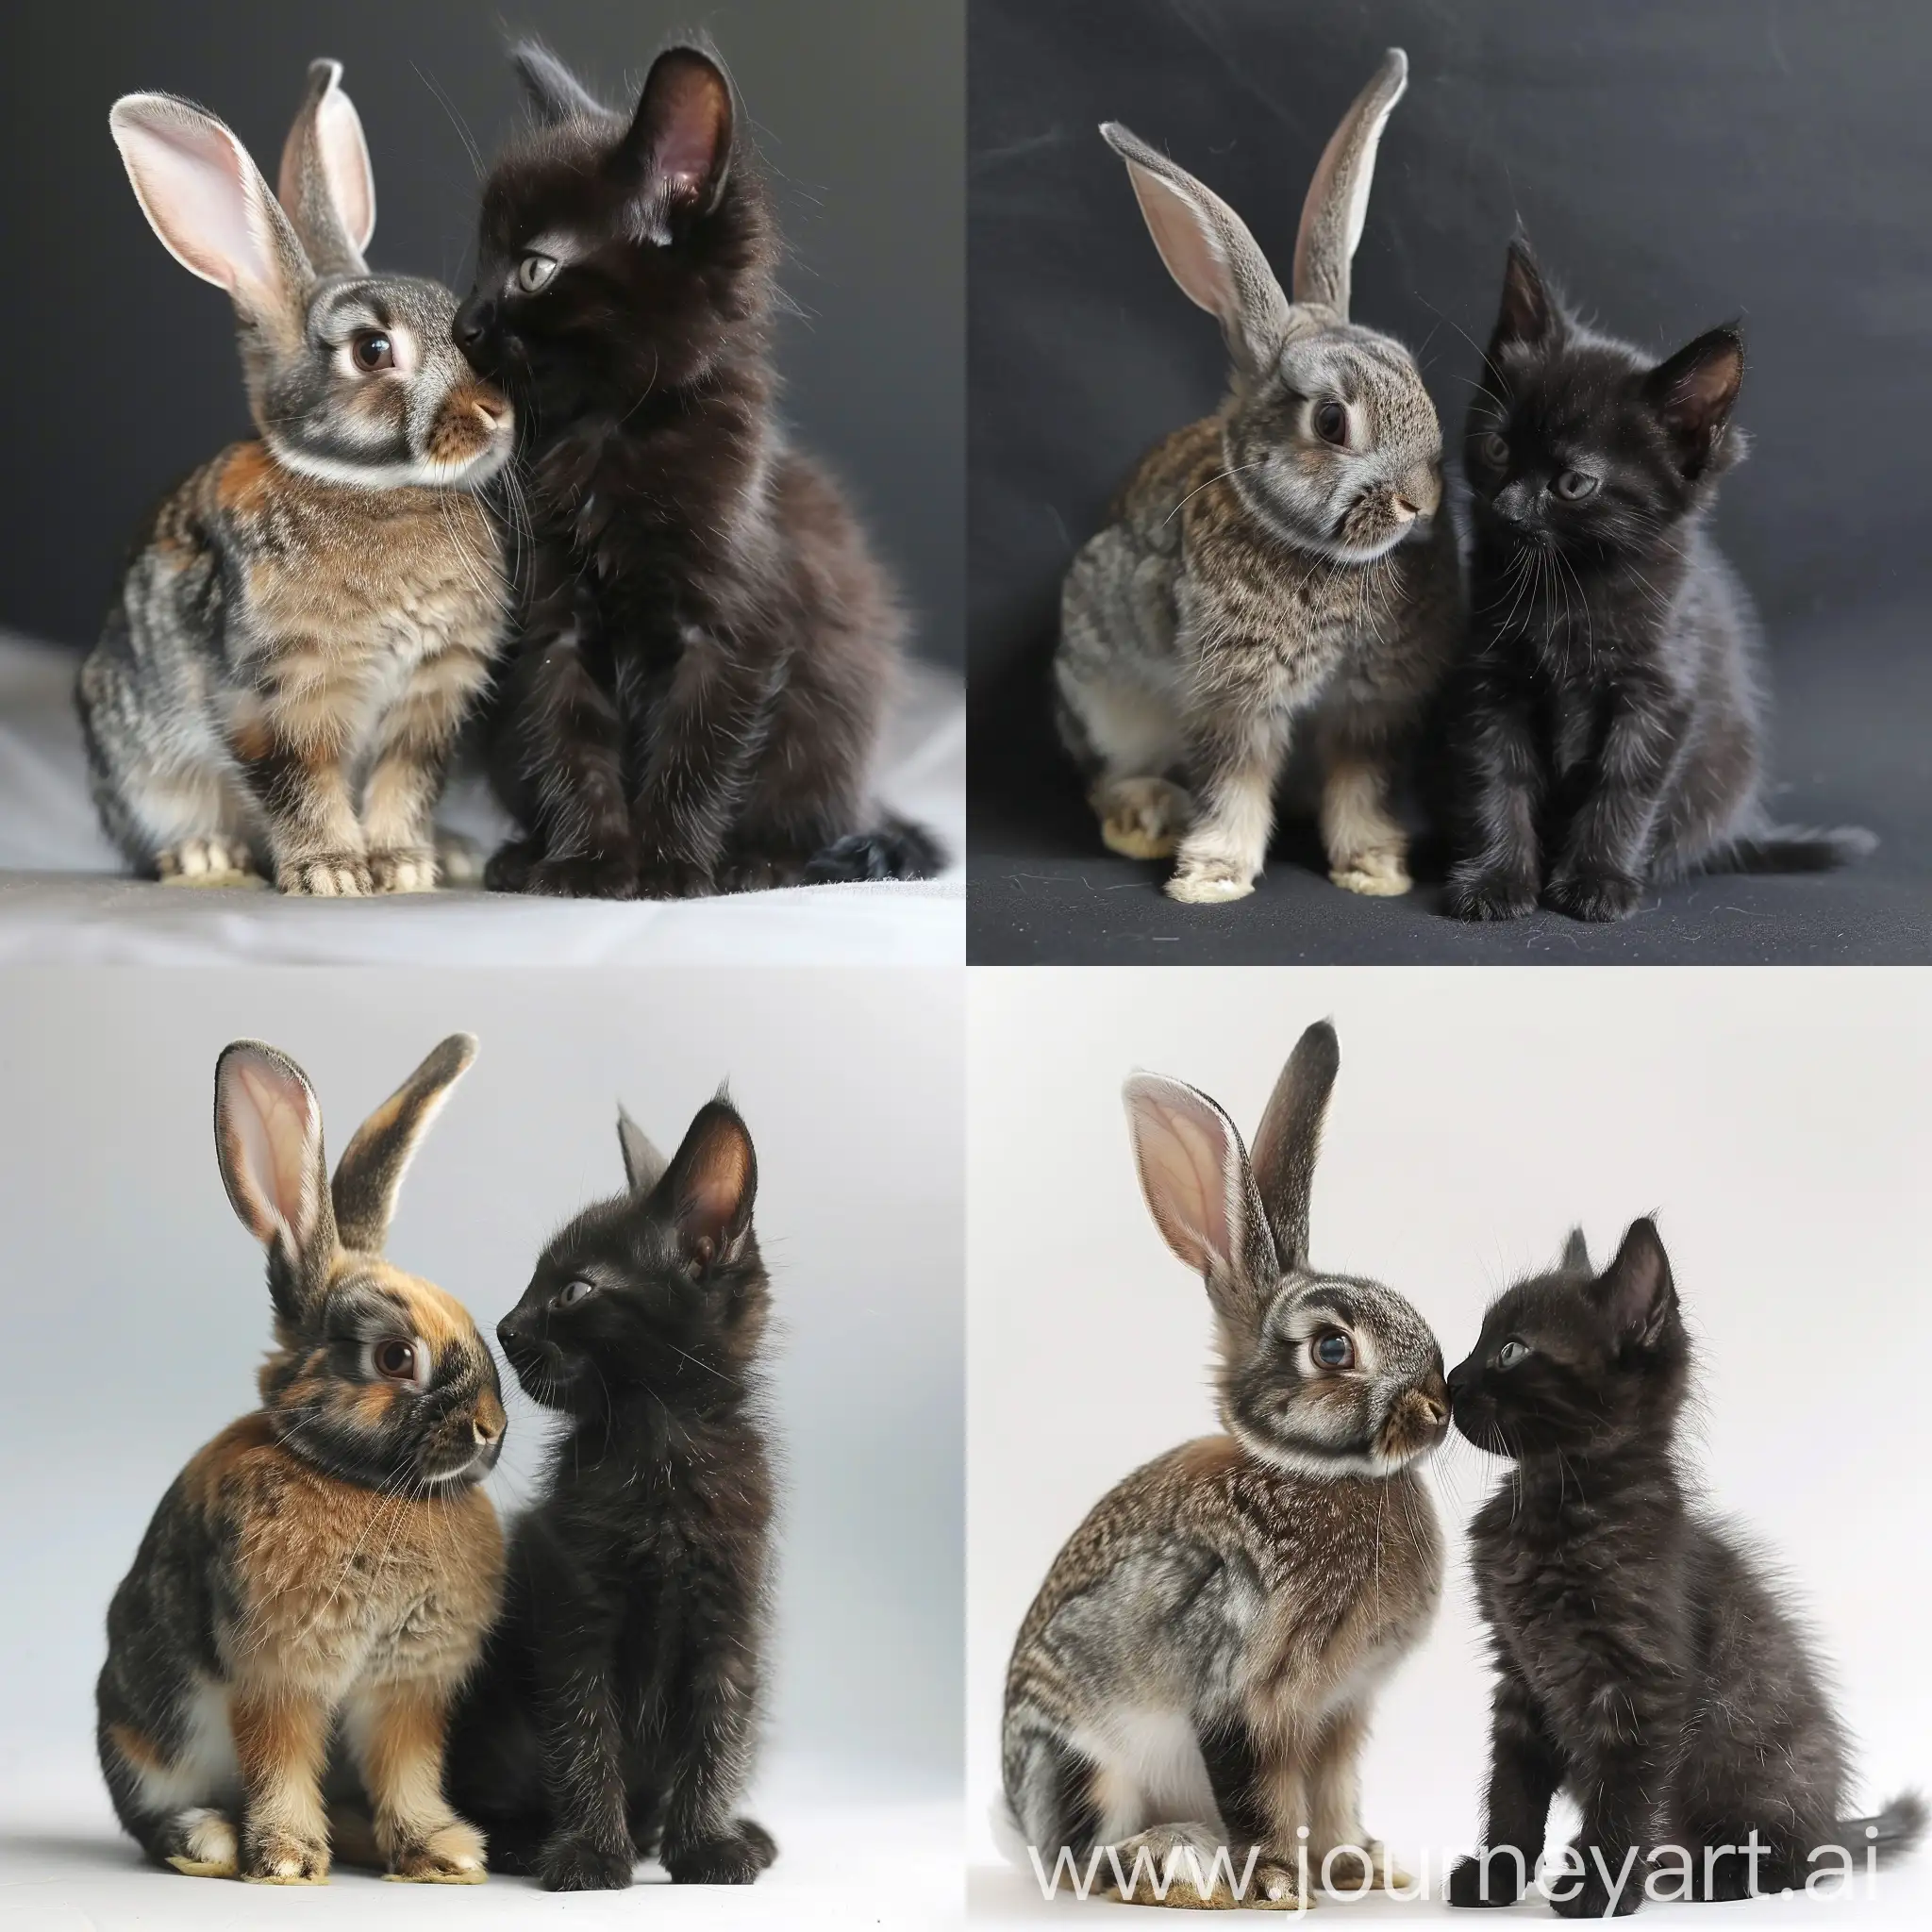 Bunny and black kitten sitting next to eachother. Both in love